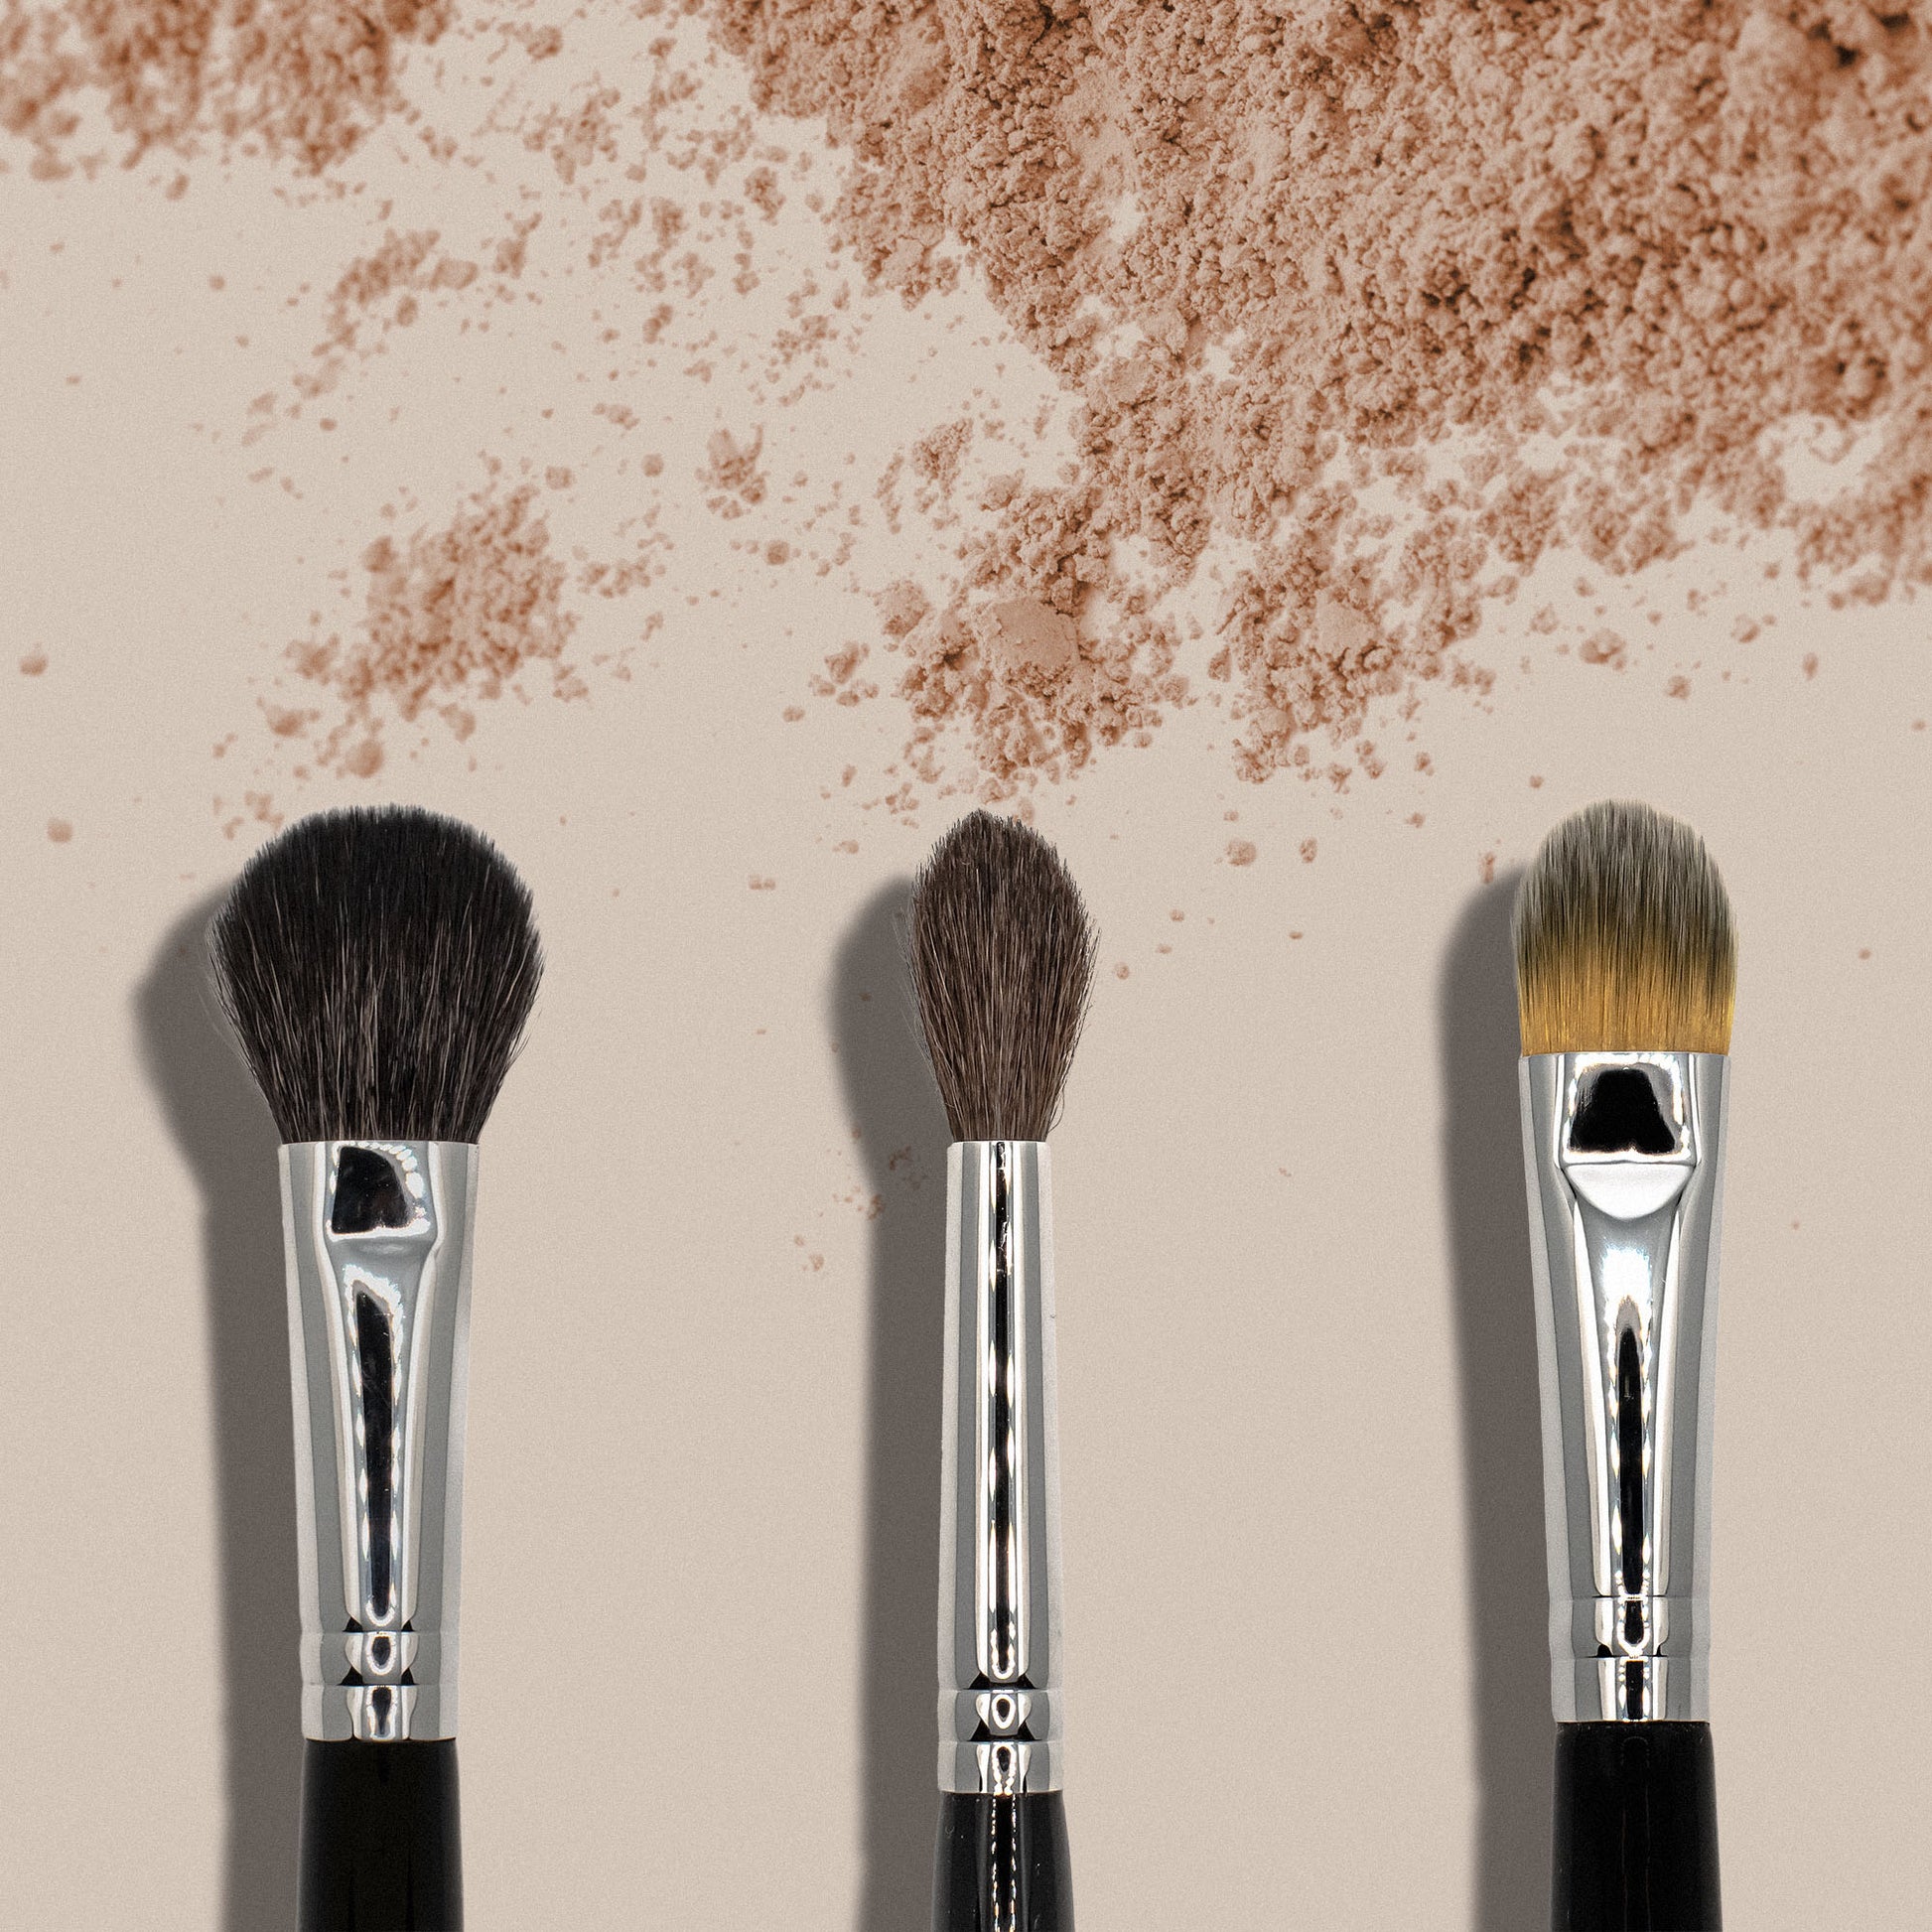 Experience smooth, effortless application with Cruisin Organics' gentle concealer brush. Specially designed with short, firm bristles, this brush allows precise application and blending of both cream and liquid concealers. Control your coverage with ease and precision.